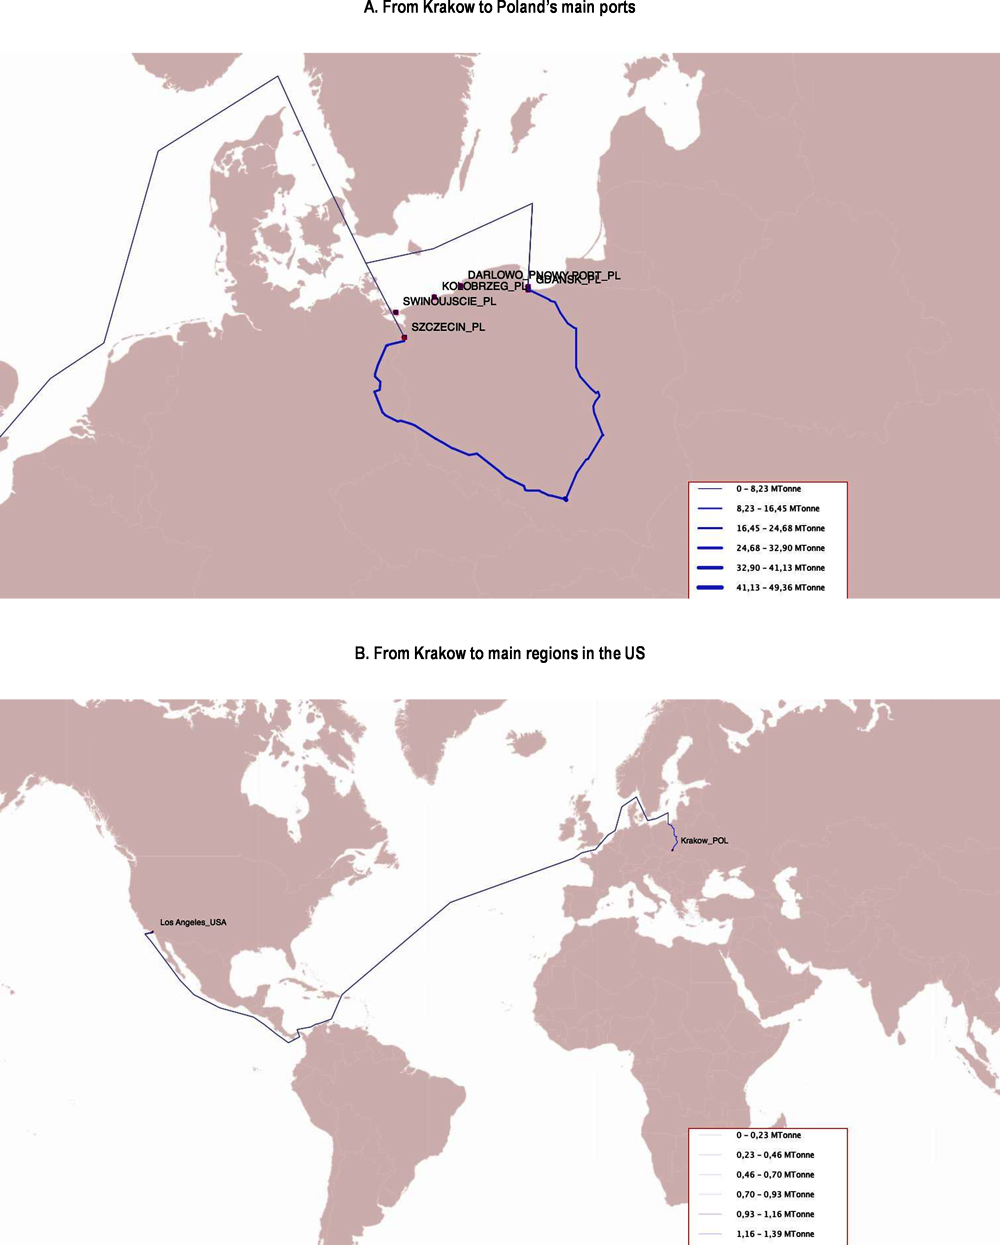 Figure 3.20. Transport routes from Krakow to Poland’s main ports and from Krakow to main regions in the US